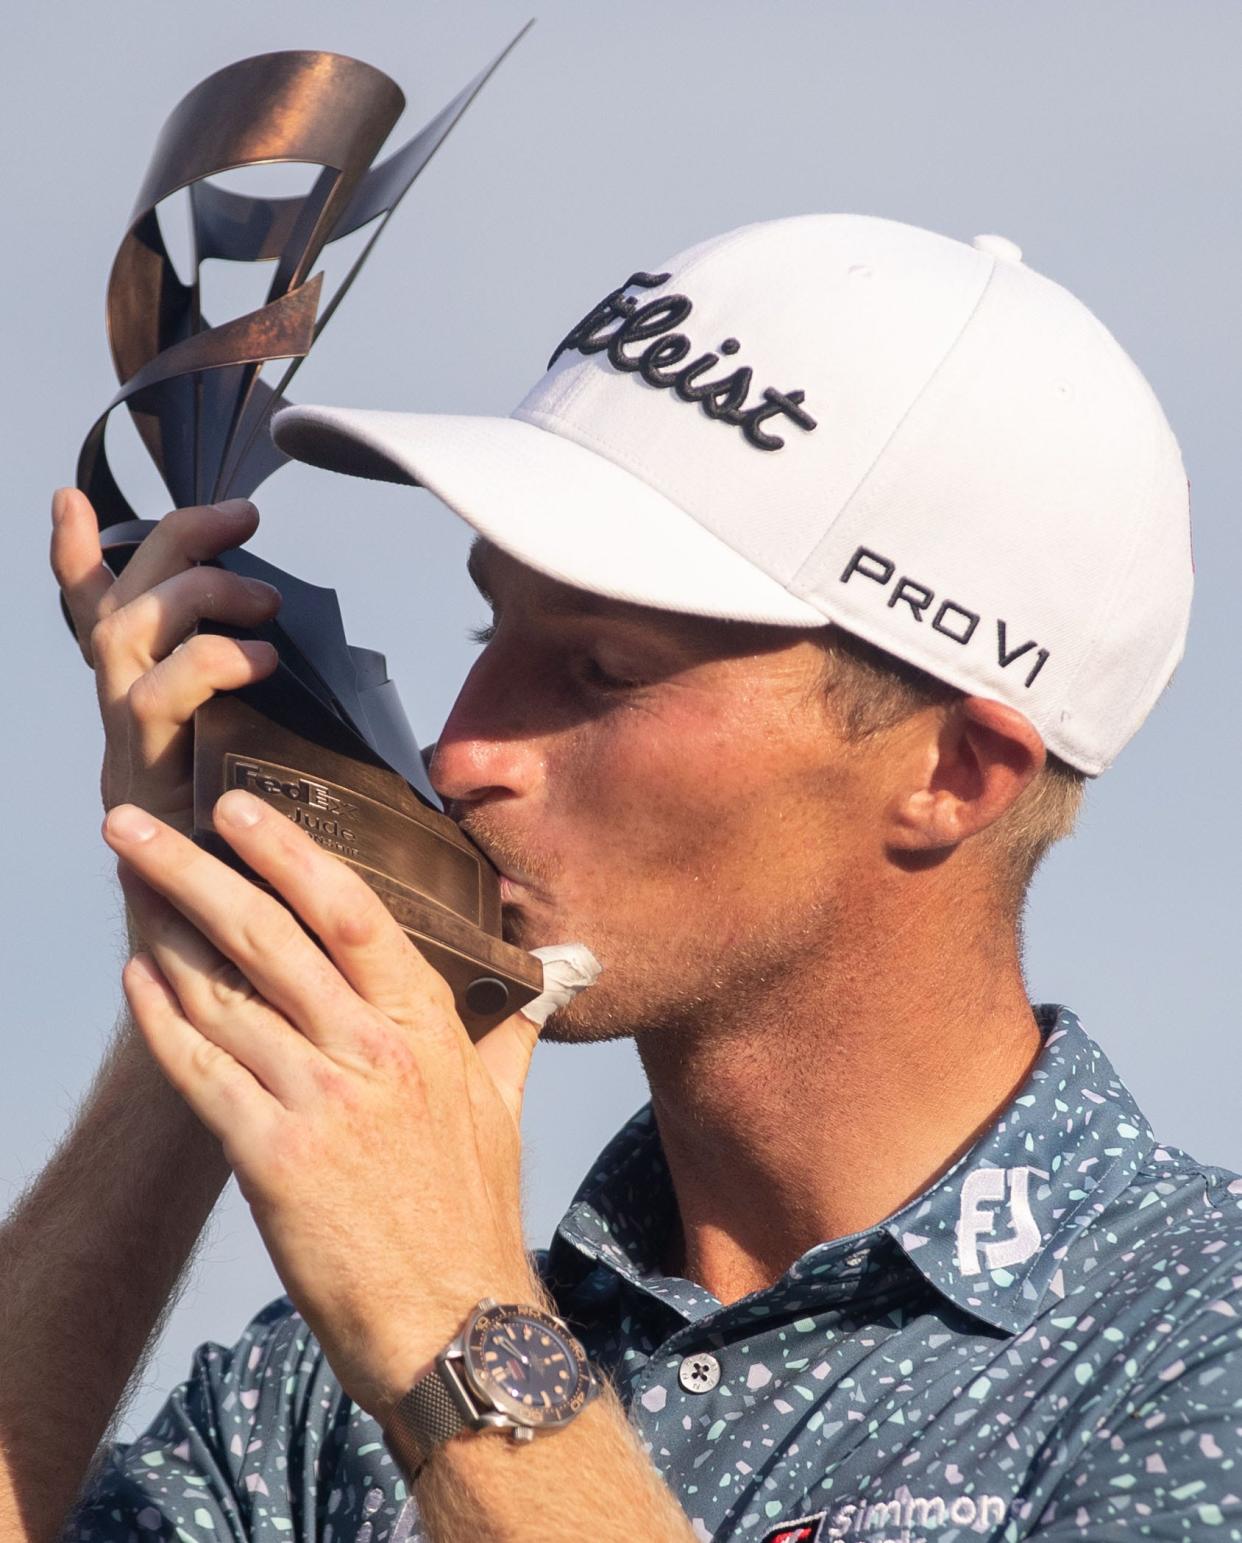 Will Zalatoris kisses his trophy after winning his first PGA tournament during the final round of the FedEx St. Jude Championship on Sunday, Aug. 14, 2022, at TPC Southwind in Memphis.